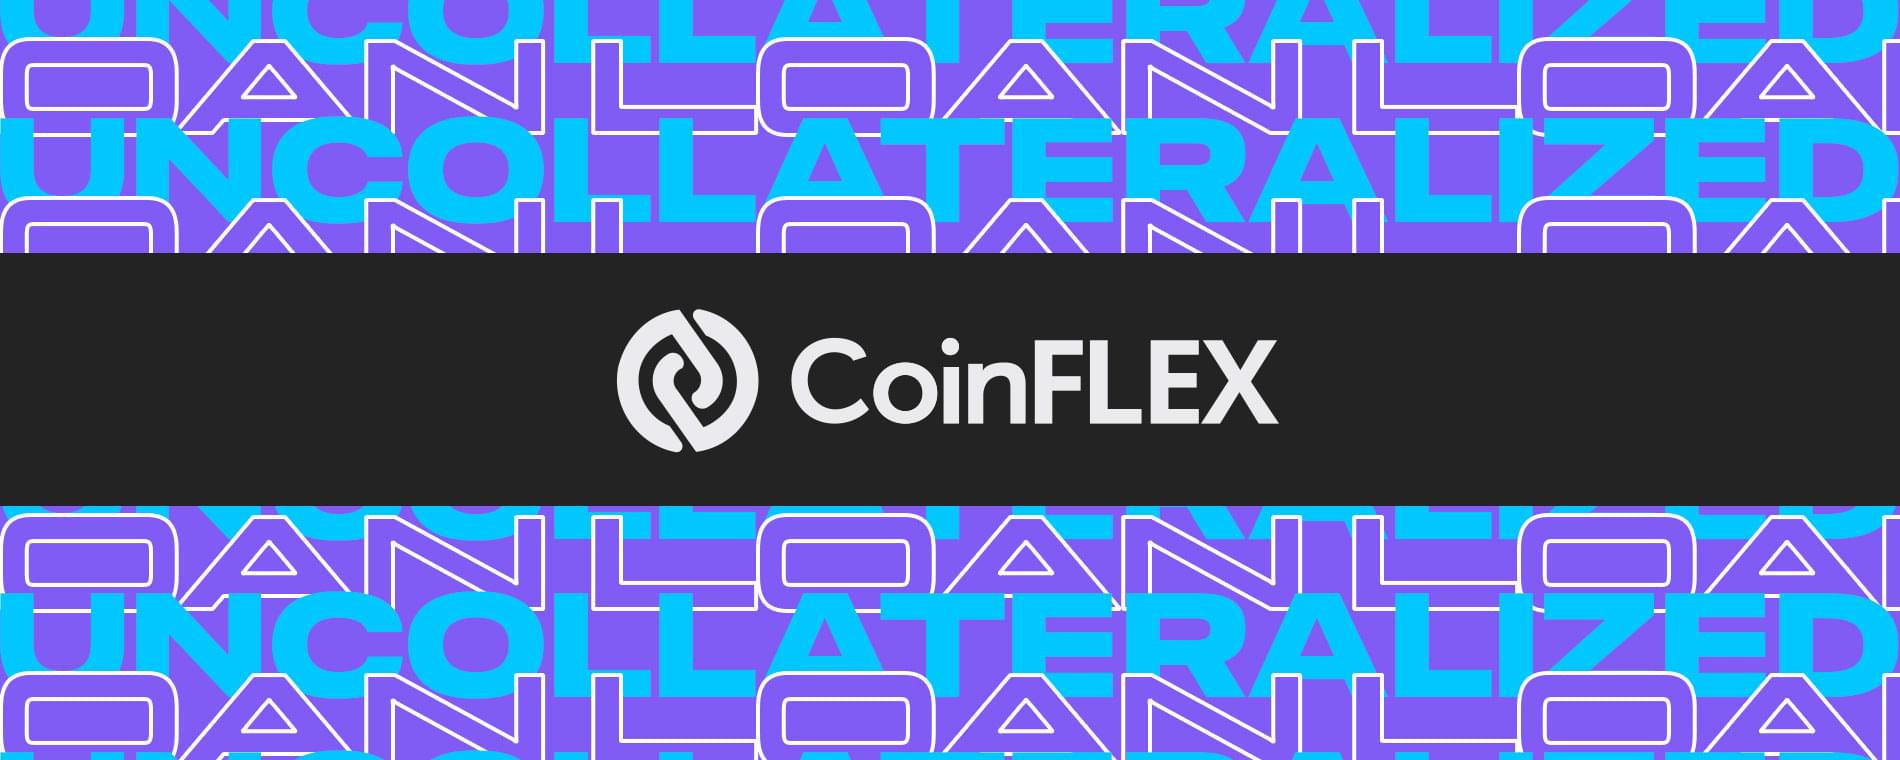 Roger Ver defaults on uncollaterlized $47 million CoinFLEX loan